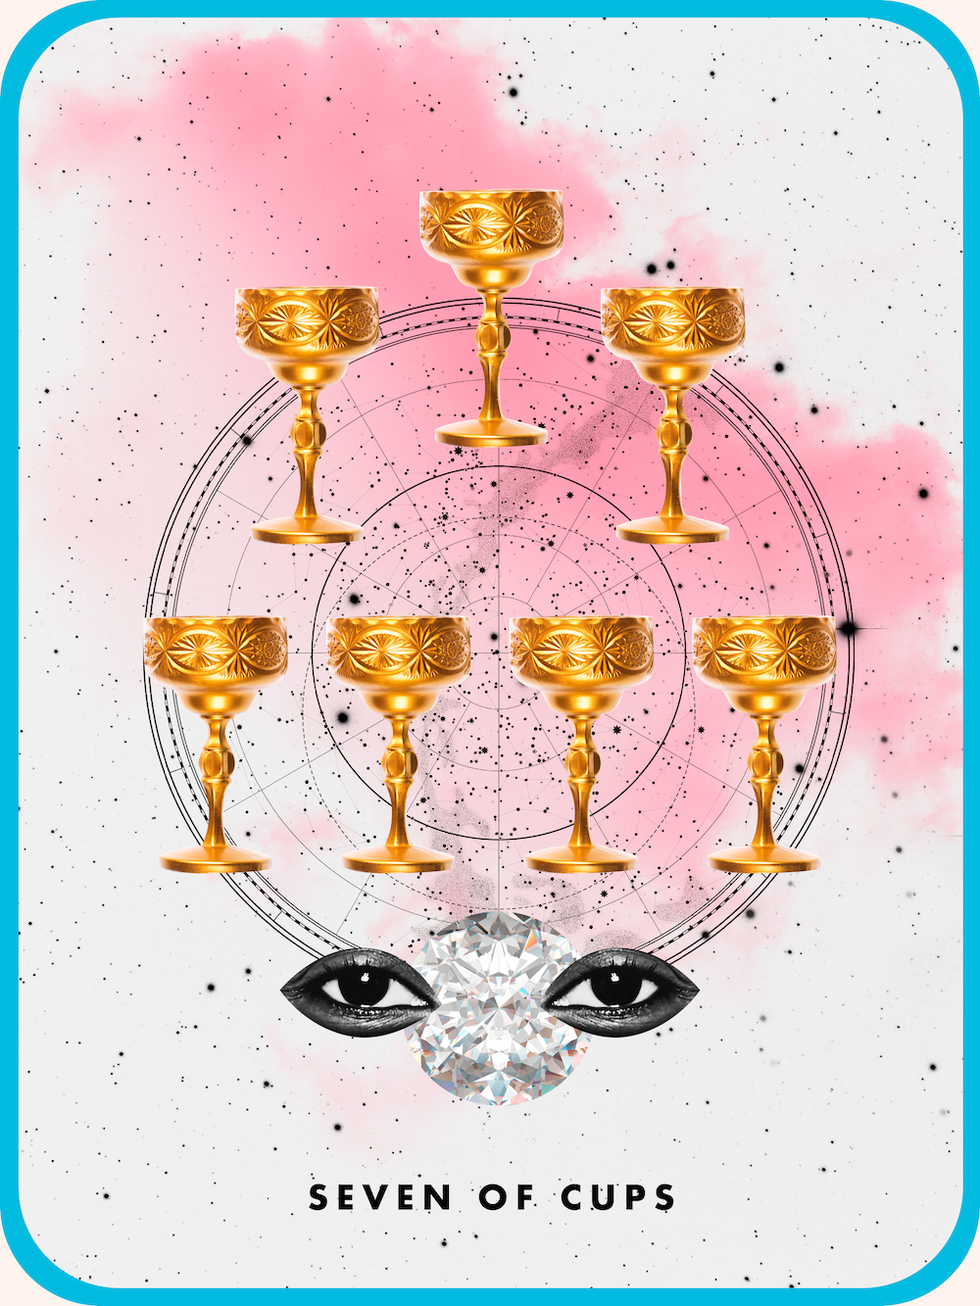 the tarot card the seven of cups, showing seven golden goblets over a black and white pair of eyes